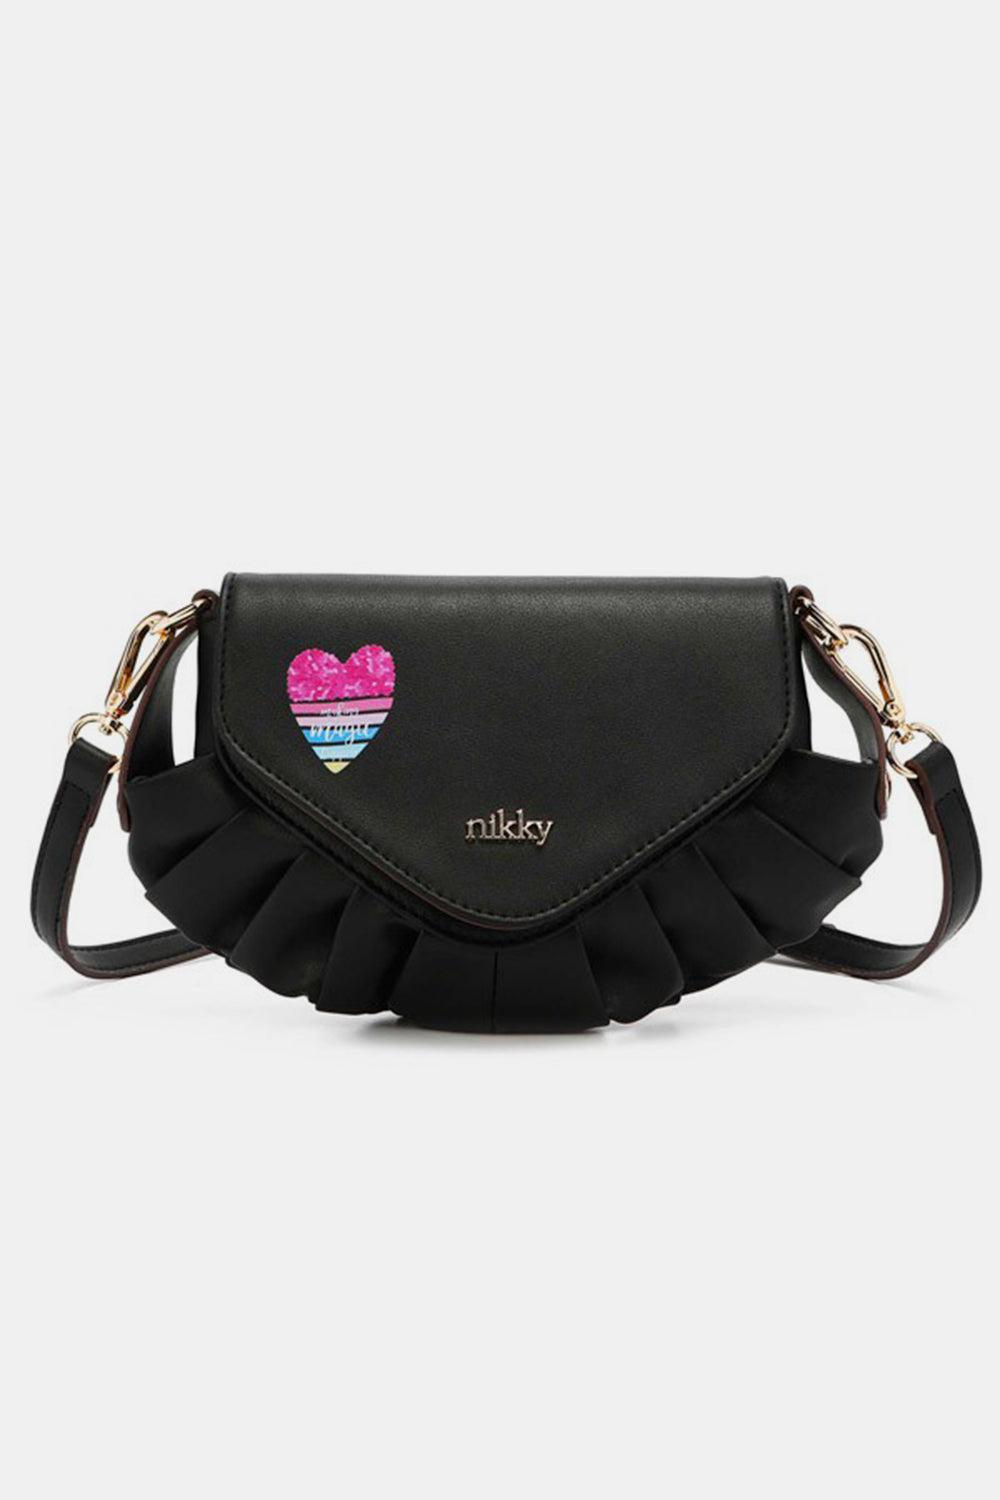 a black purse with a heart on it